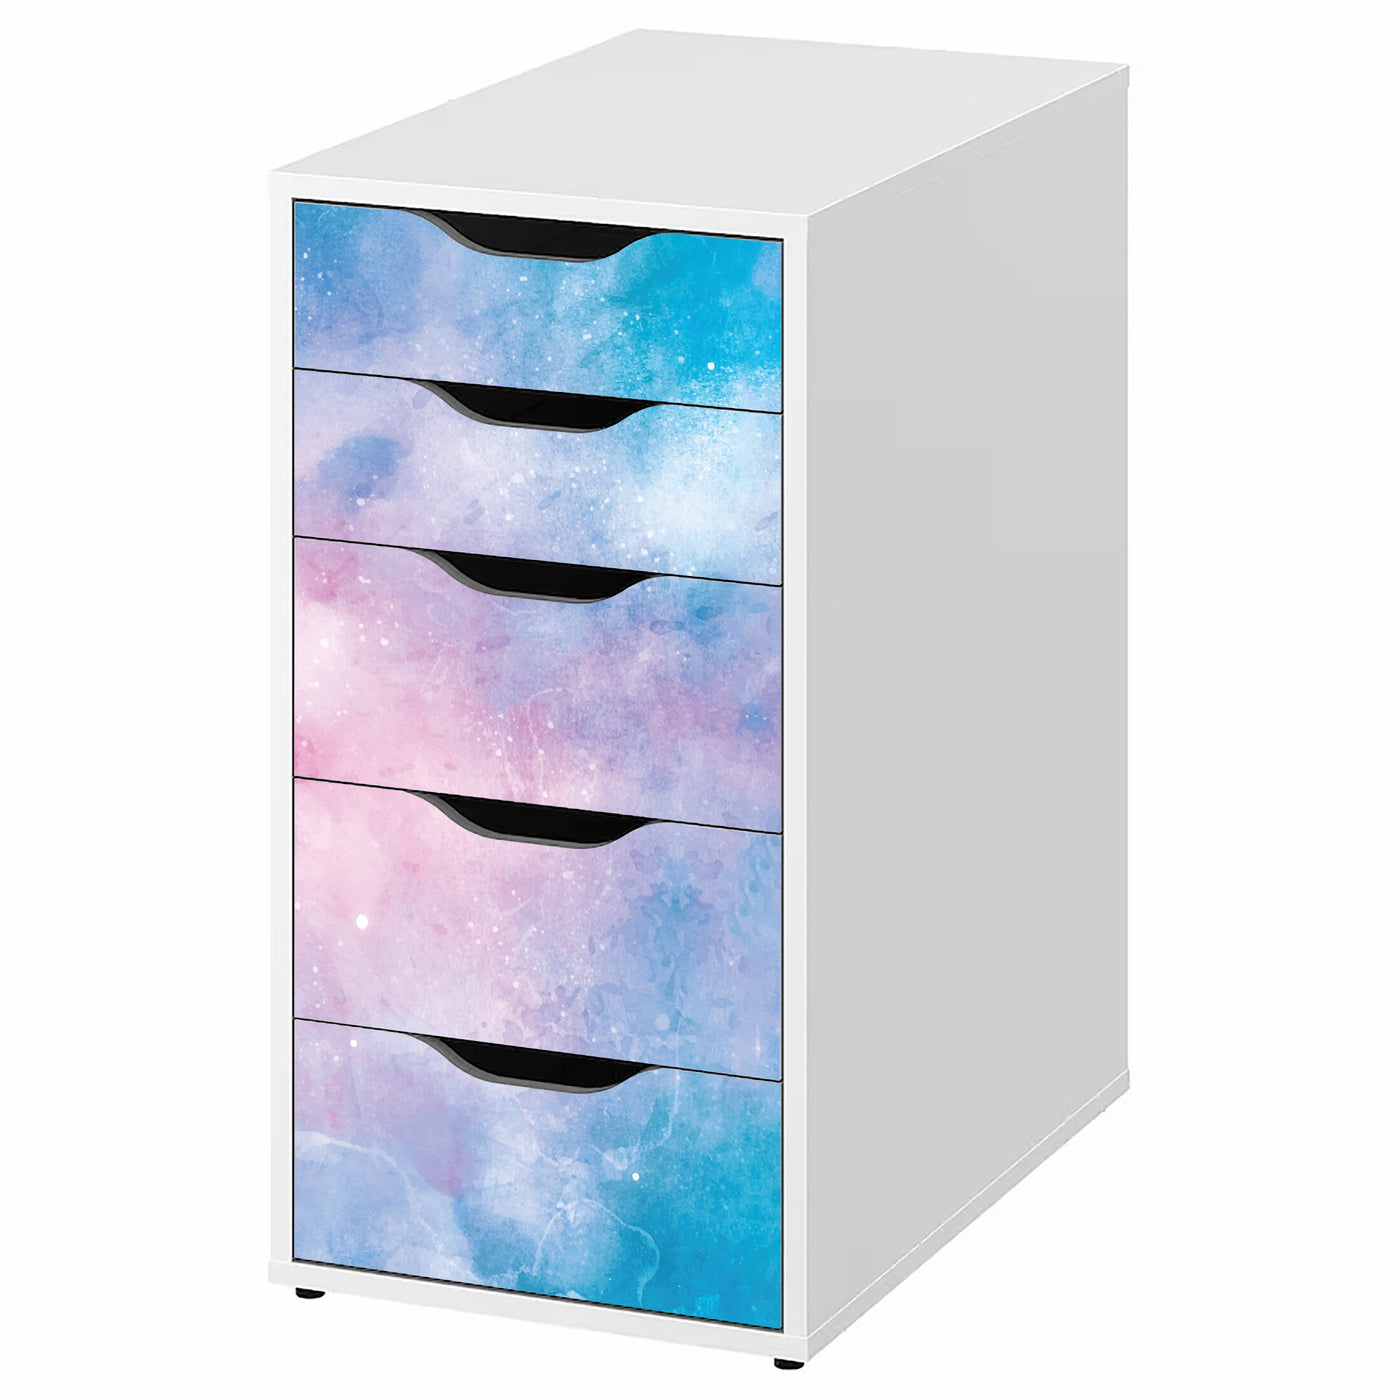 Pastel galaxy decals for IKEA Alex 5 drawer unit (not included)